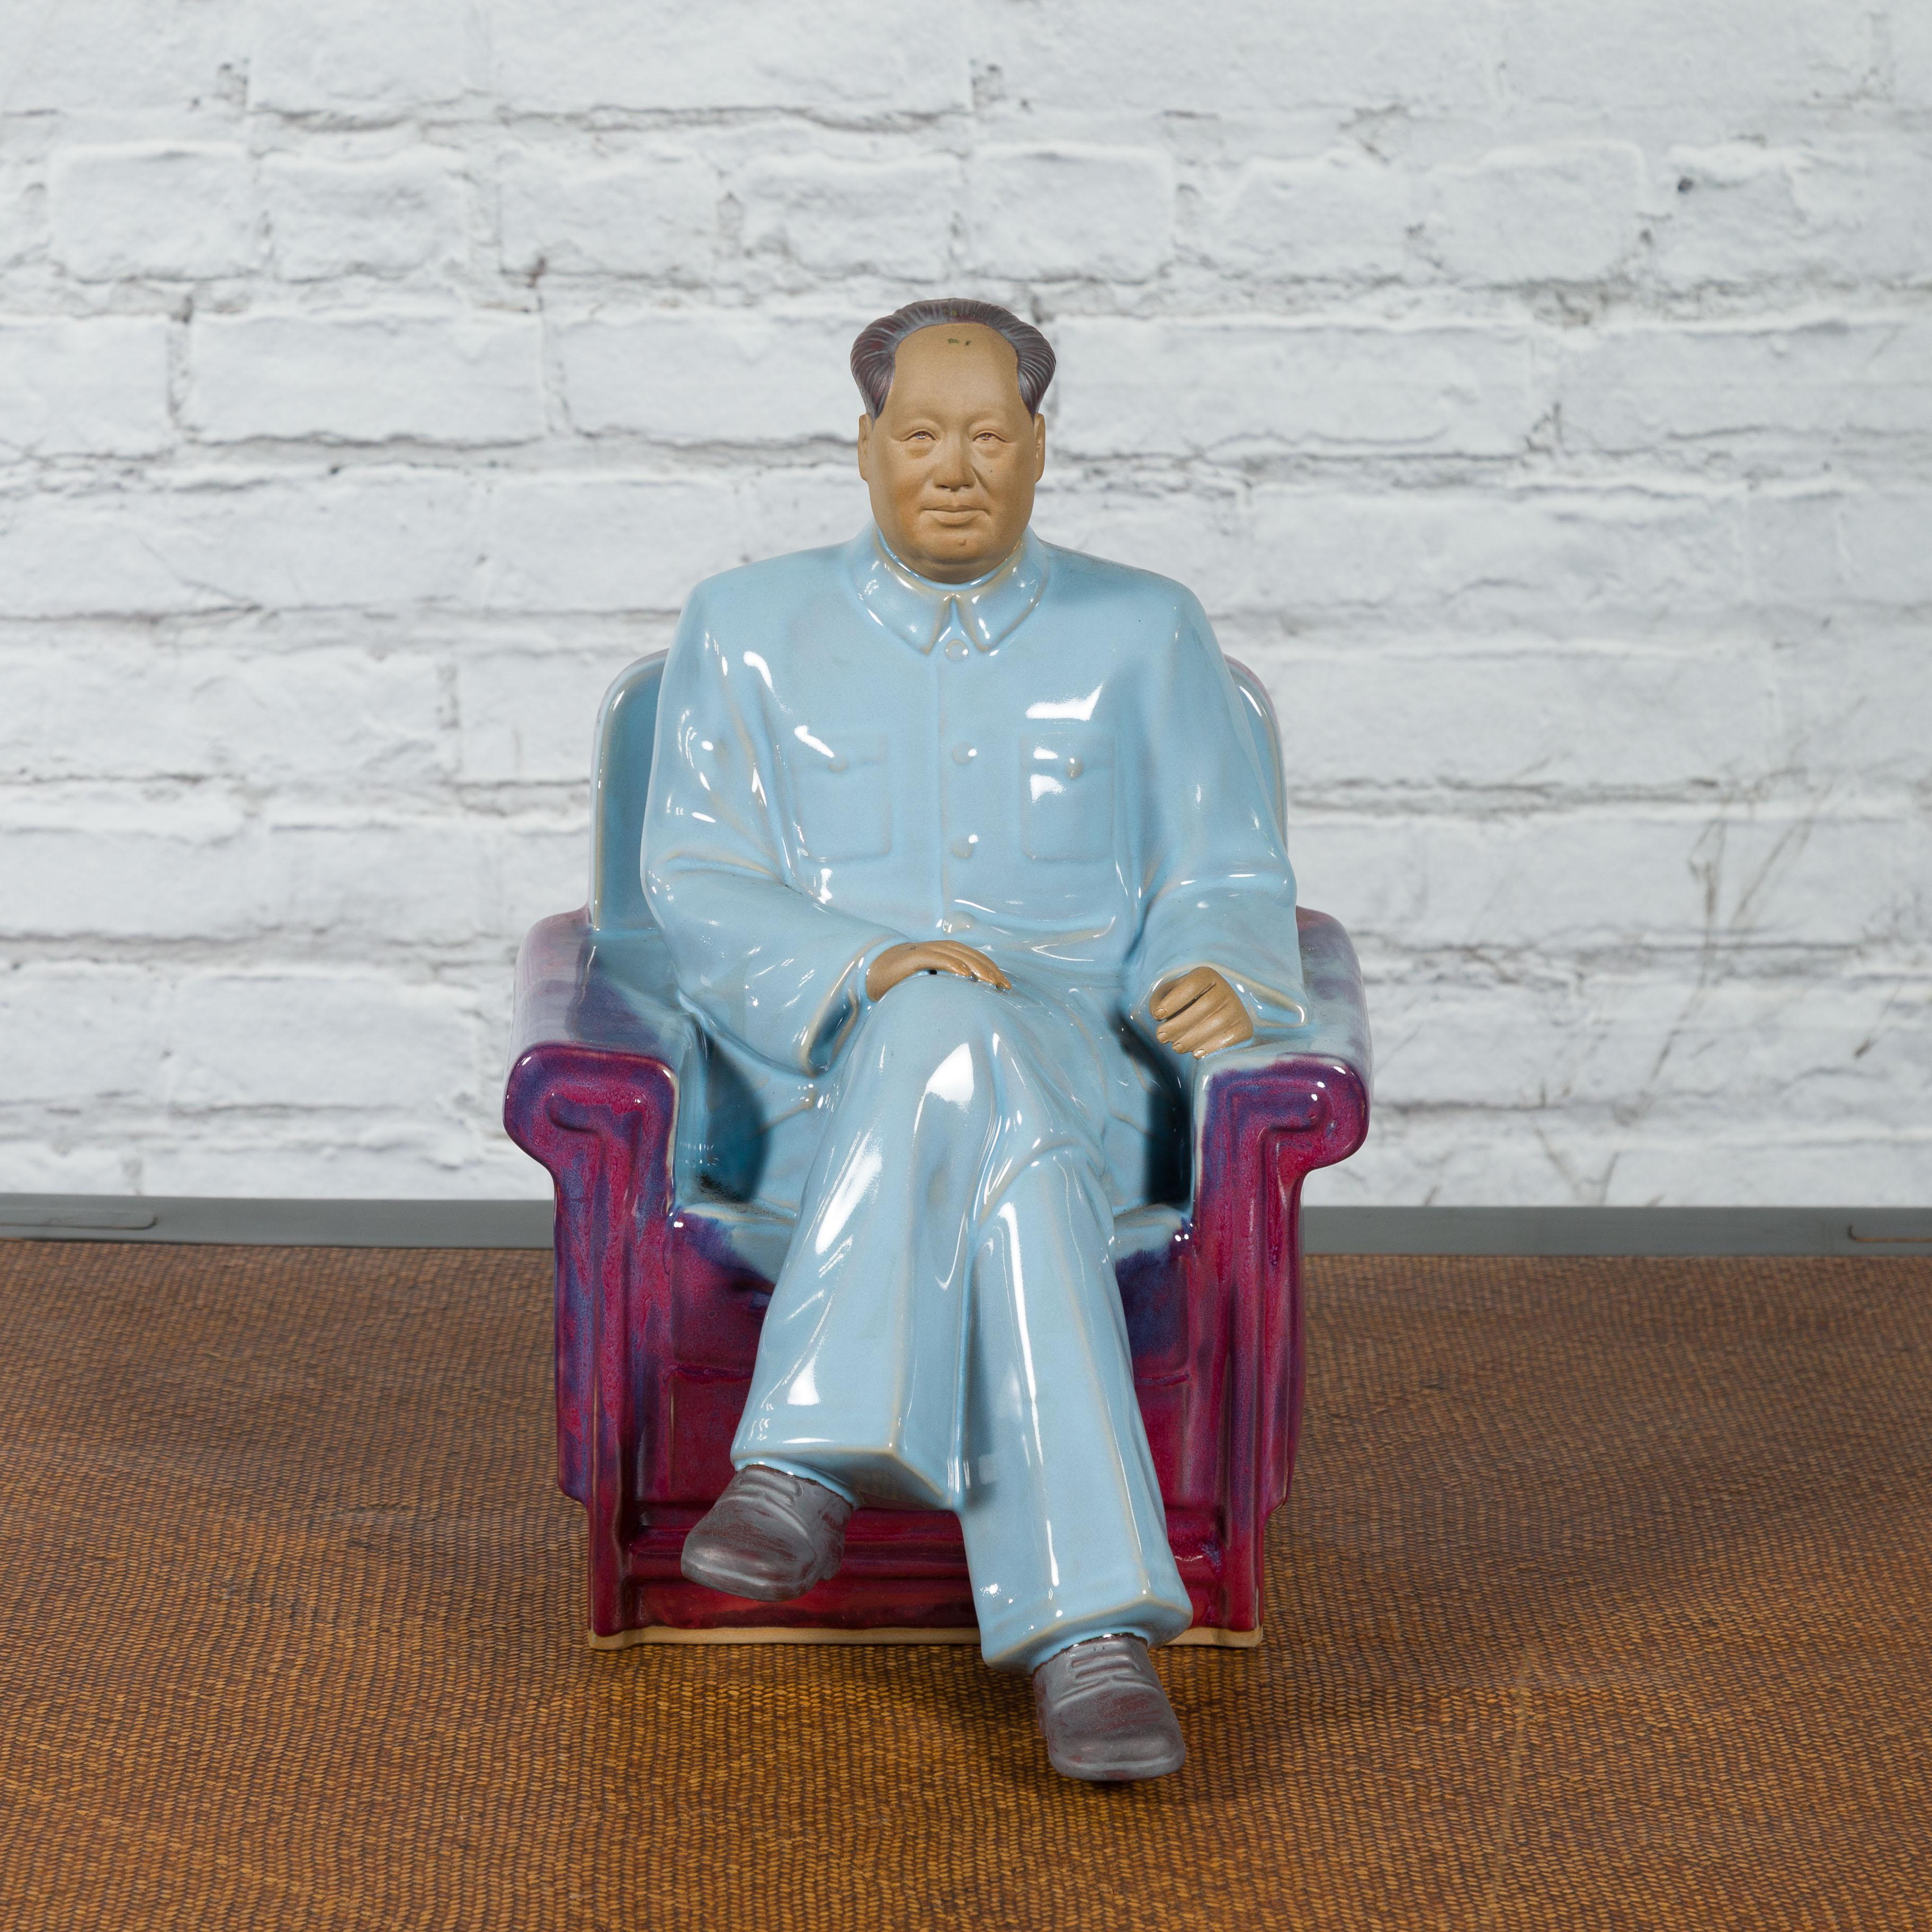 gilded statue of mao zedong sitting in a chair